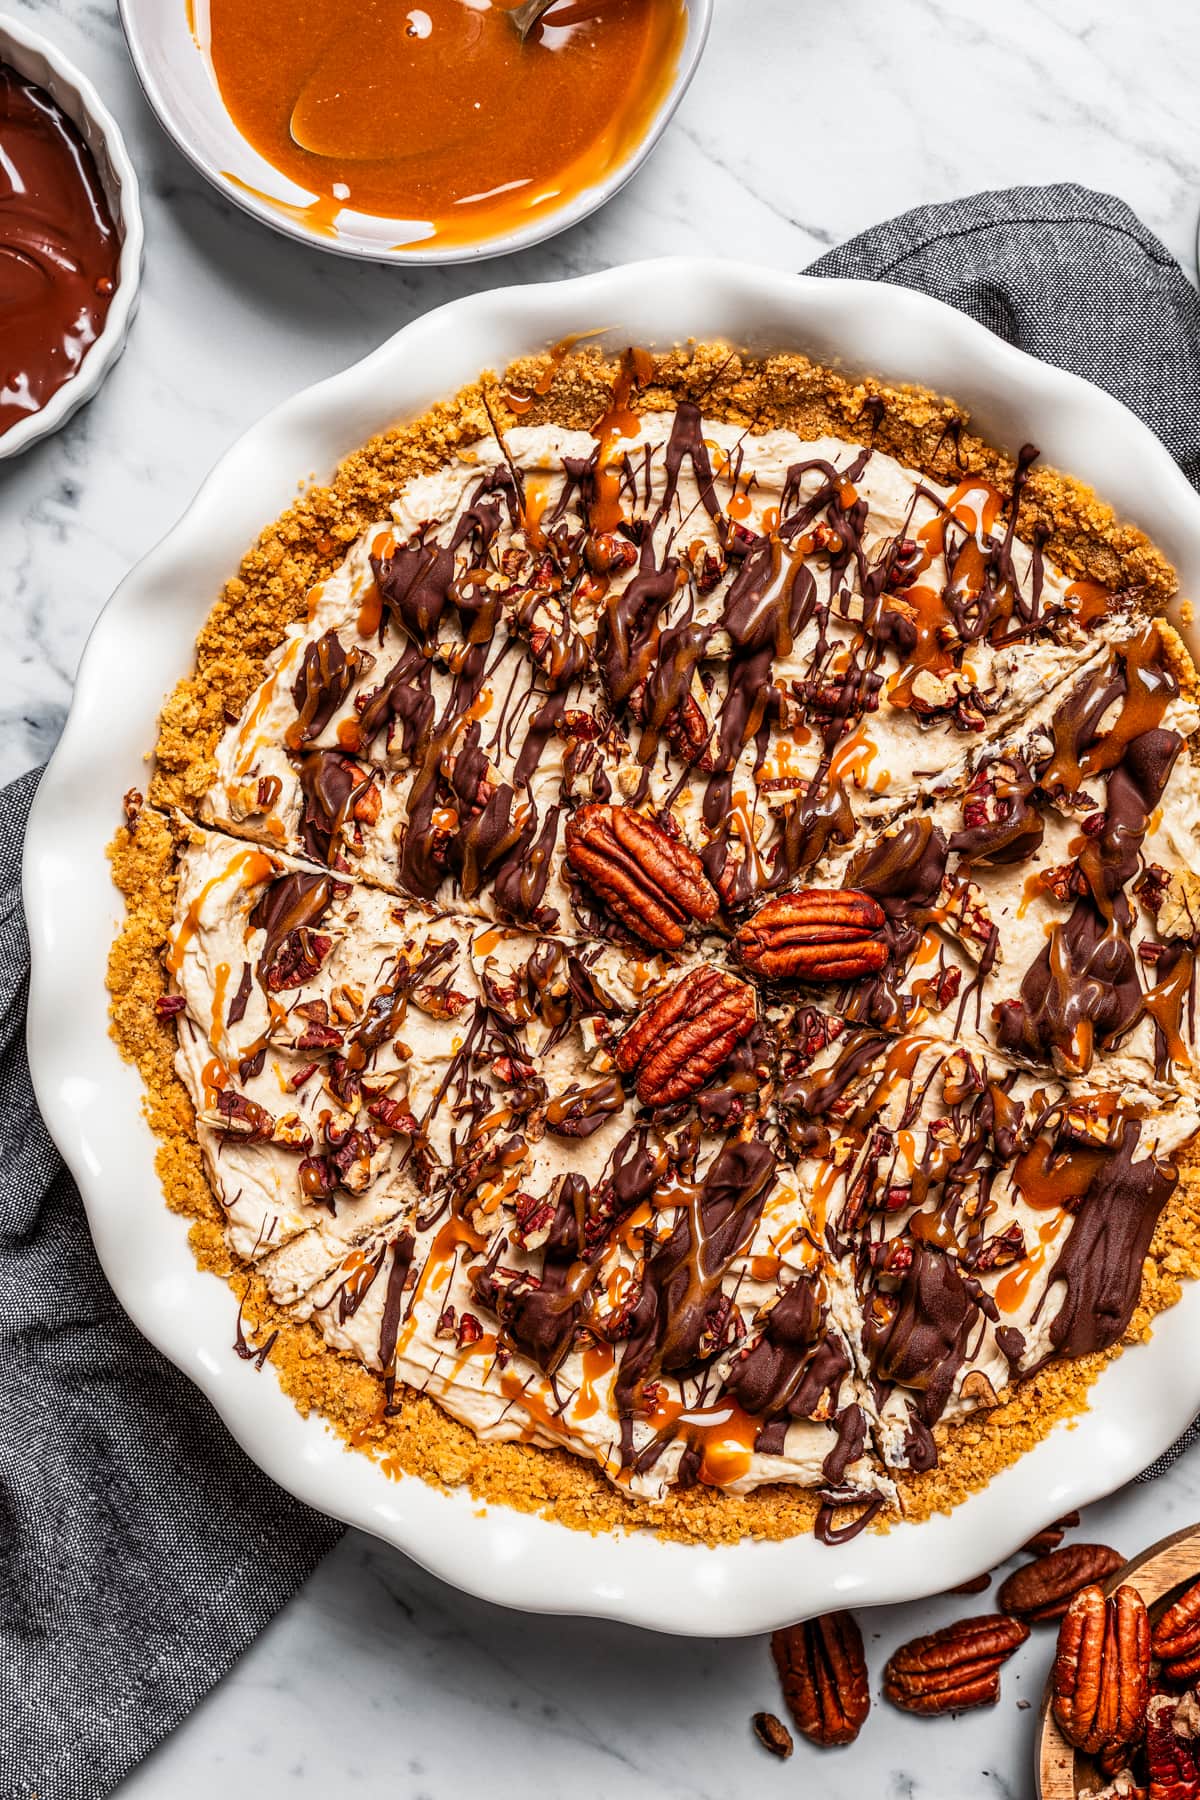 Overhead view of Turtle pie topped with toasted pecans and drizzled with caramel and chocolate, next to bowls of toppings.